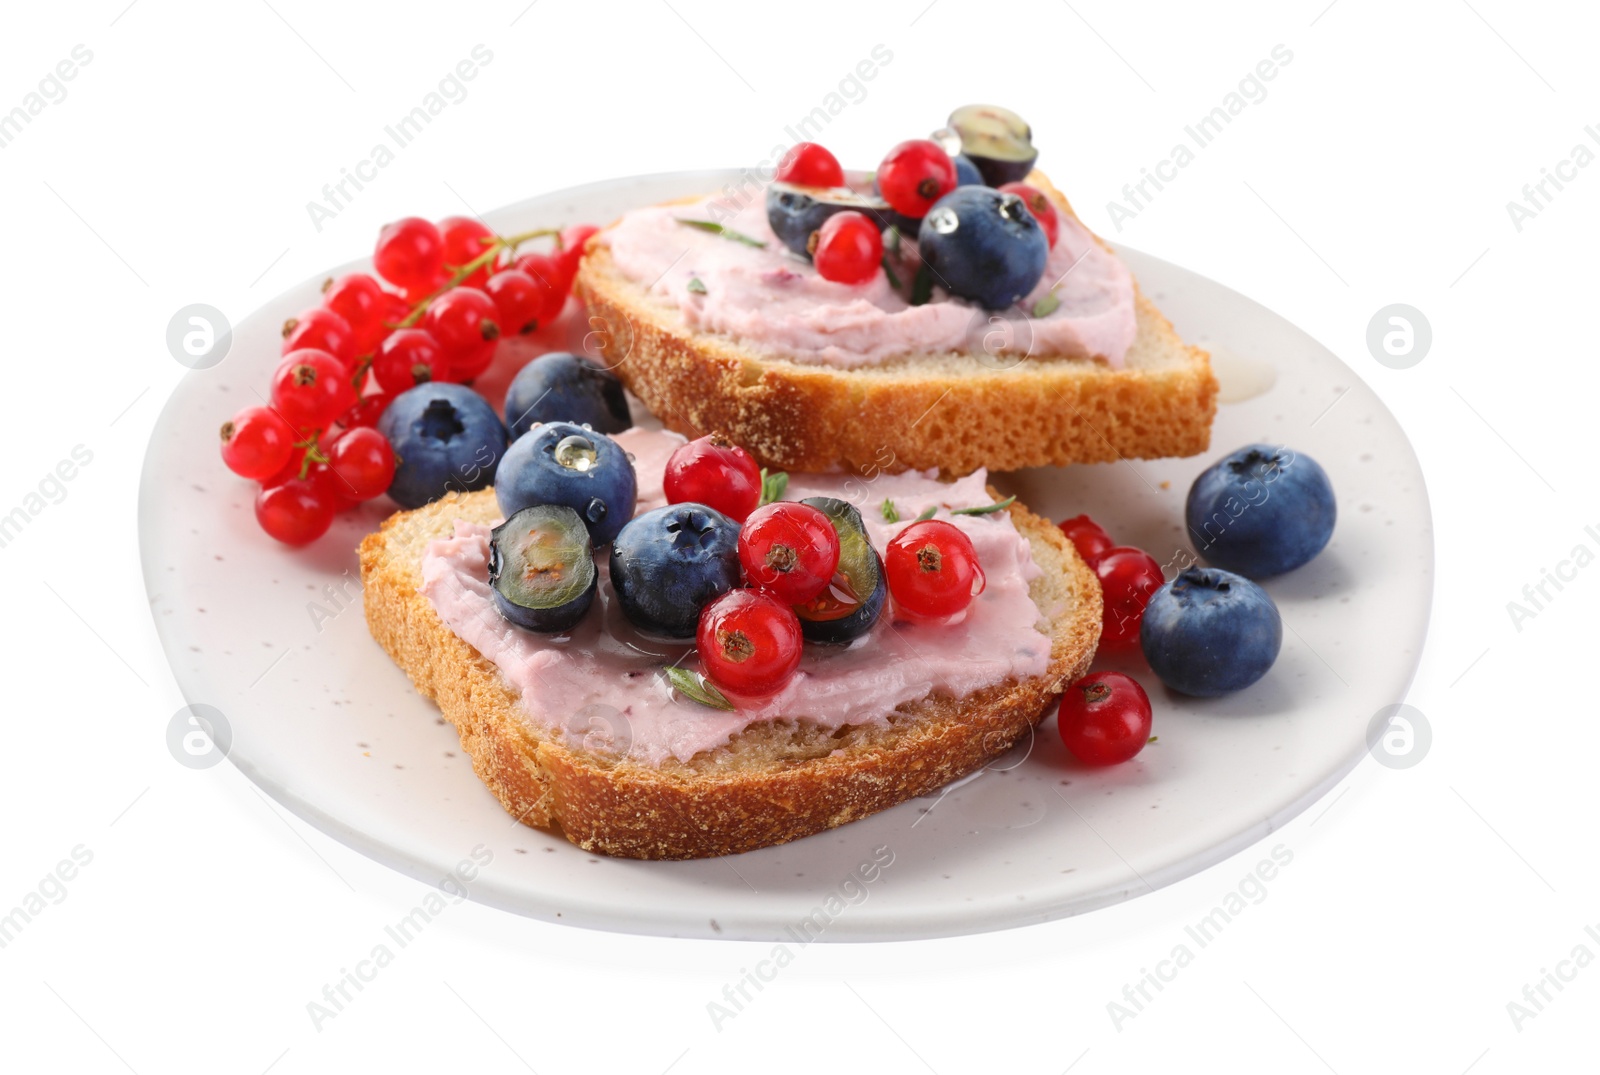 Photo of Tasty sandwiches with cream cheese, blueberries and red currants isolated on white